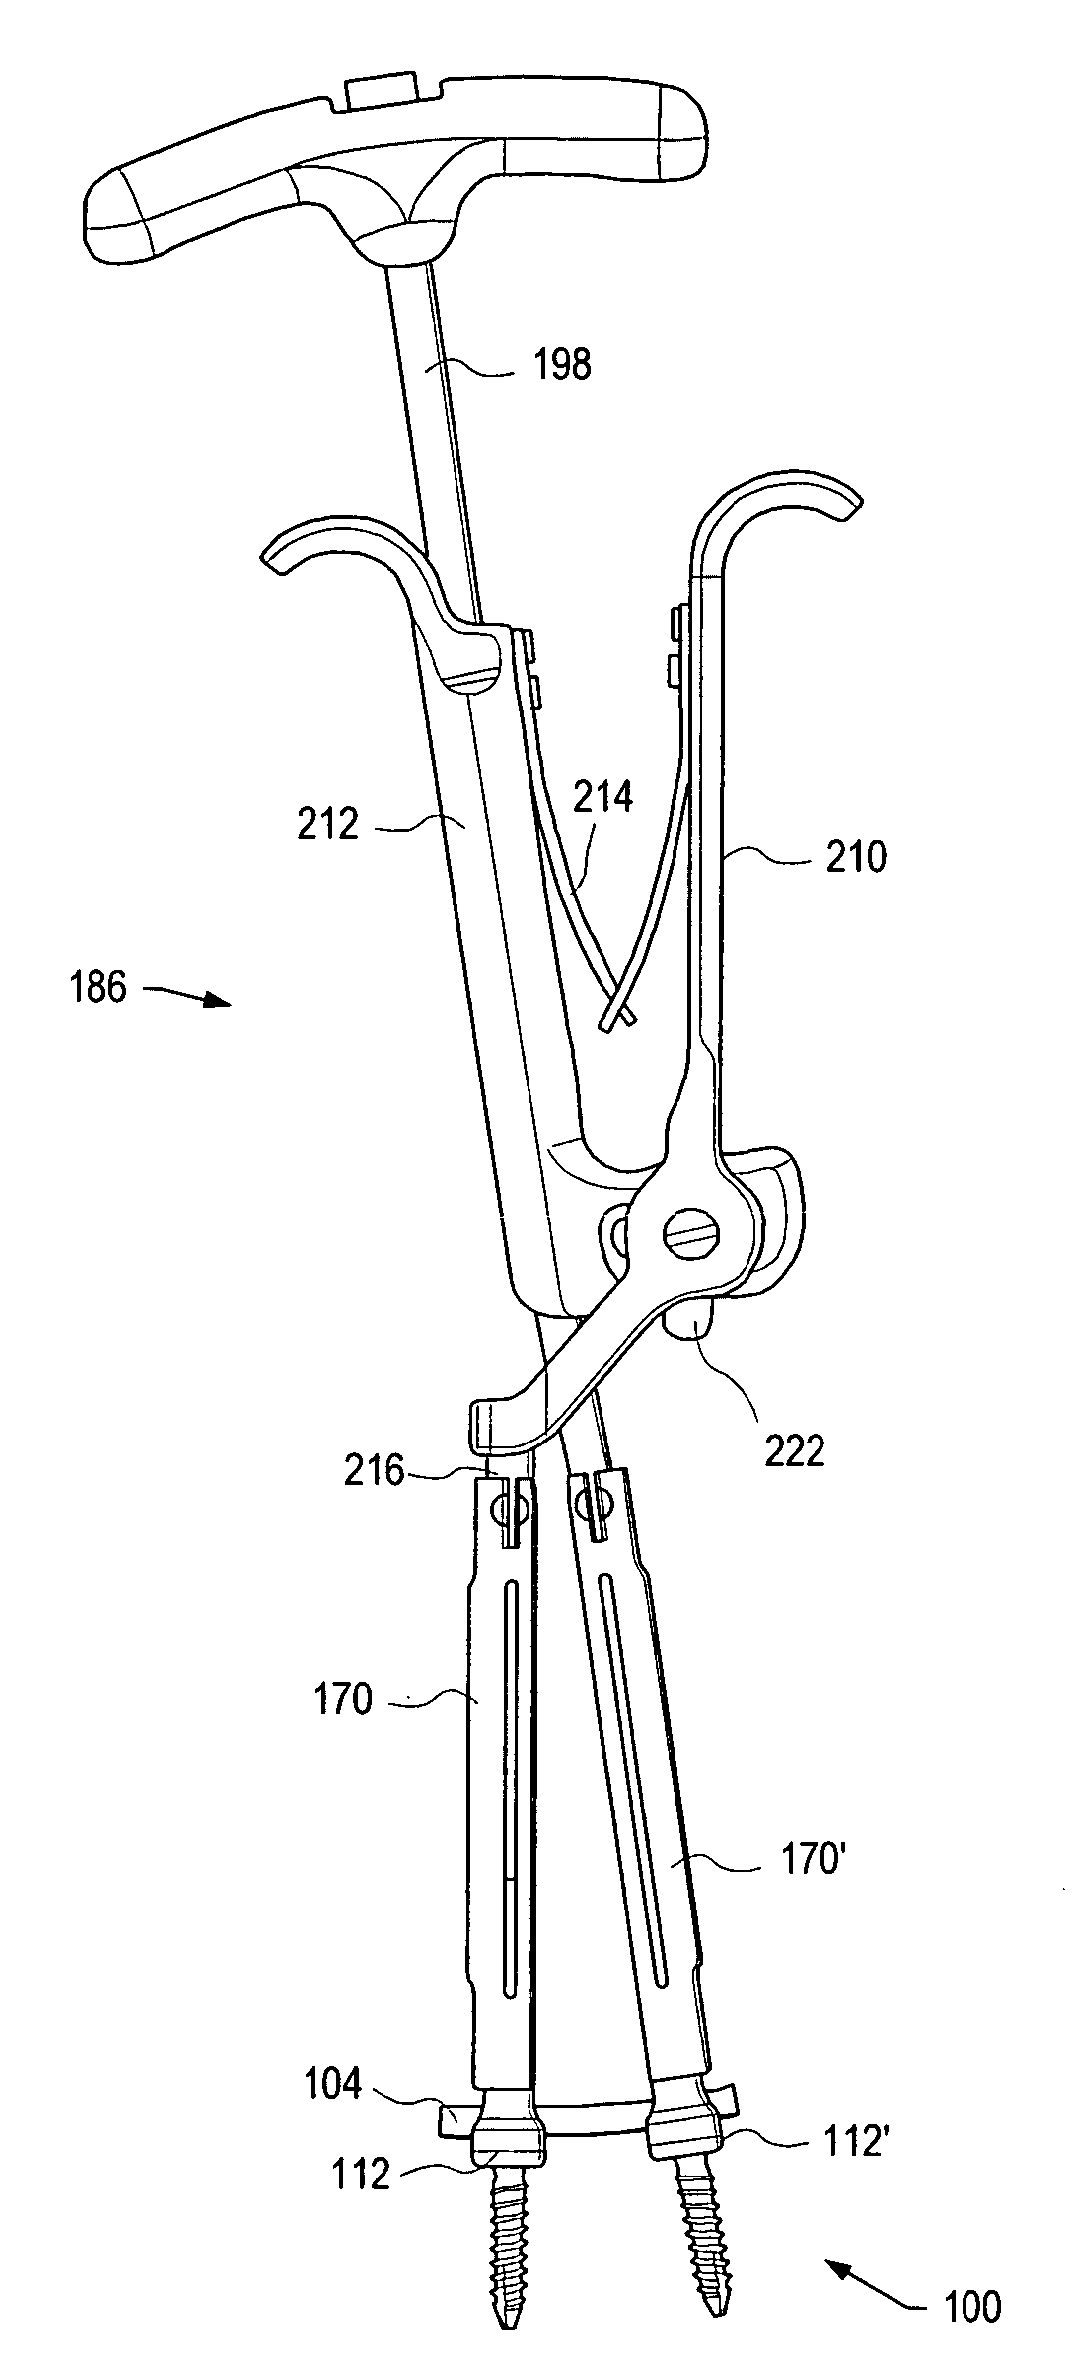 Instruments and methods for adjusting separation distance of vertebral bodies with a minimally invasive spinal stabilization procedure